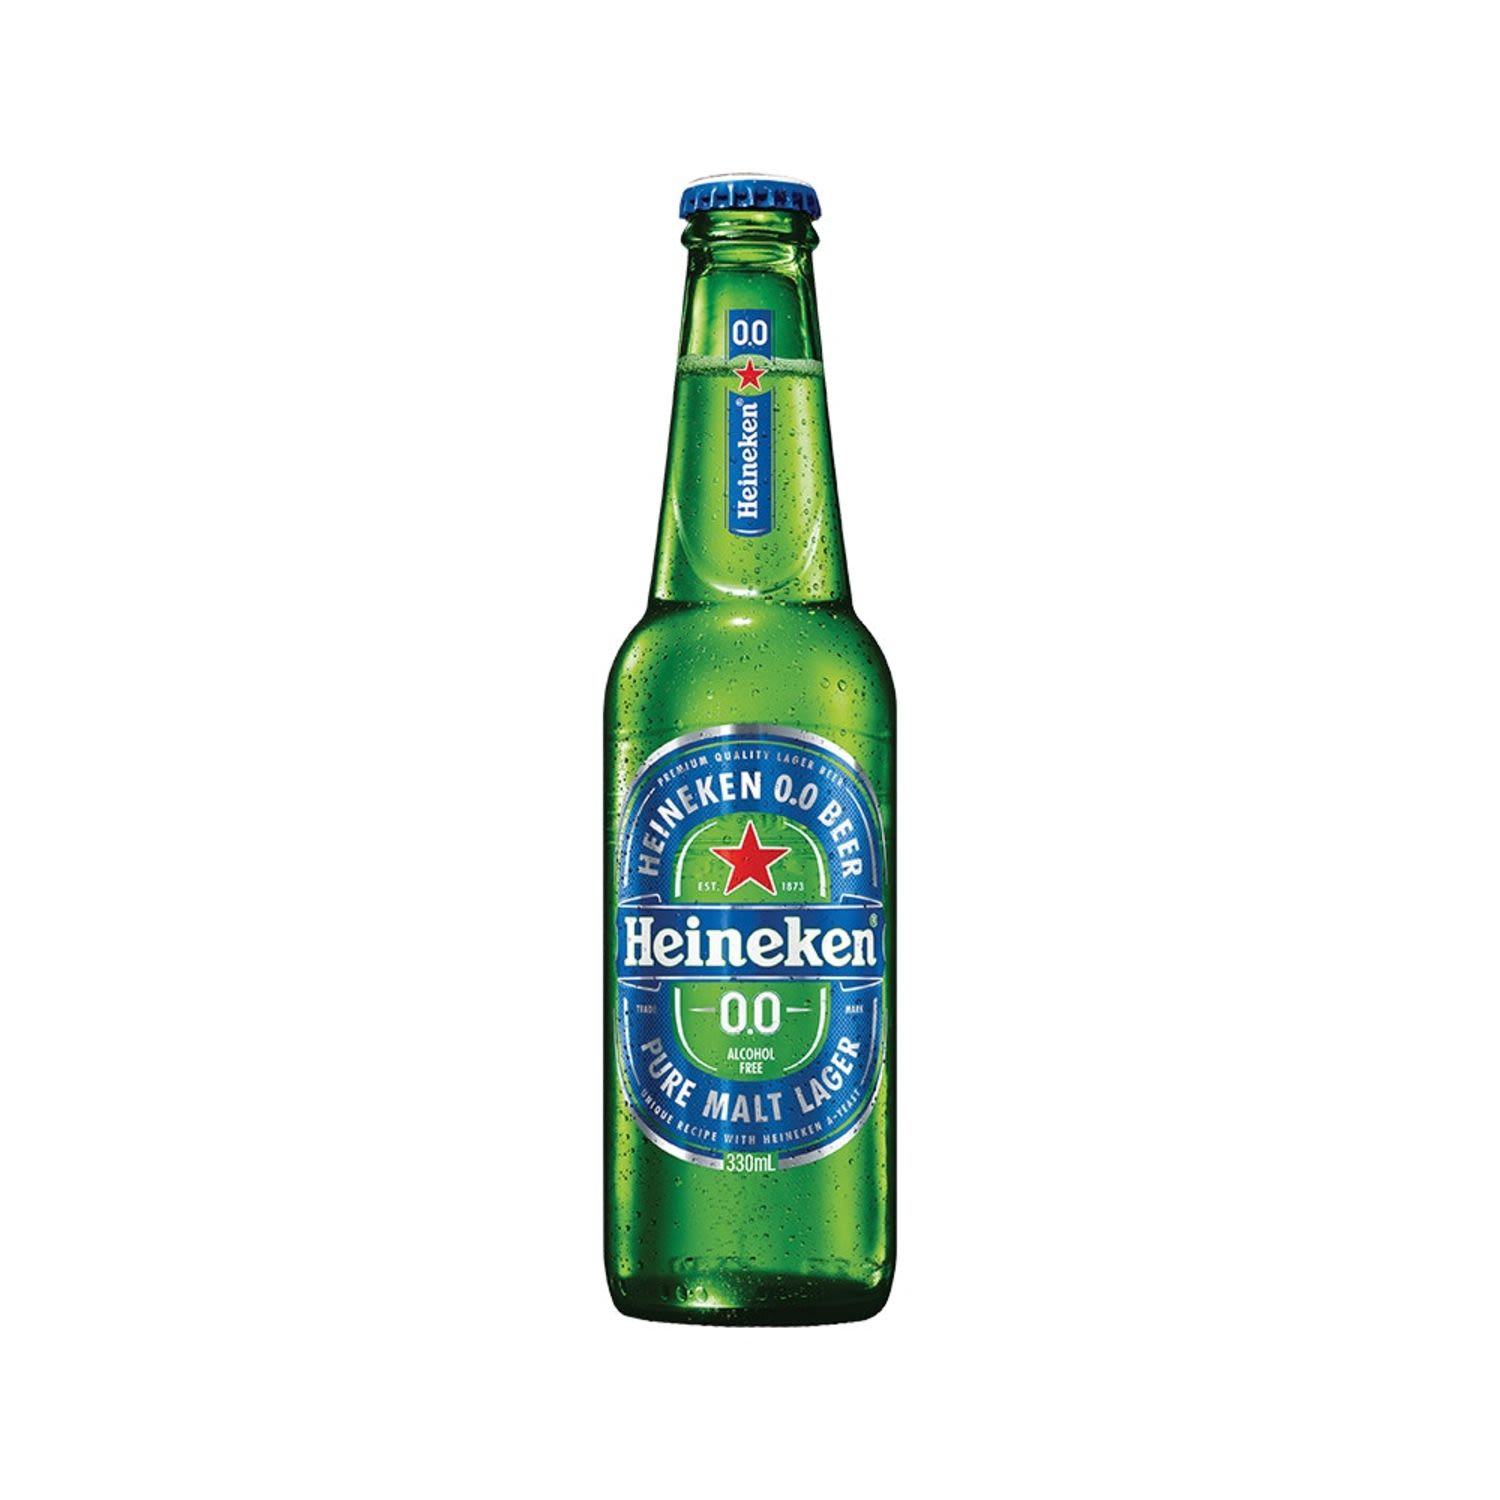 "Heineken unique 0.0 recipe is  brewed with pure malt and special  A-Yeast, just like the original Heineken  lager beer. Heineken 0.0 - a natural,  pure malt lager for a premium taste, without alcohol. "<br /> <br />Alcohol Volume: 0.00%<br /><br />Pack Format: Bottle<br /><br />Standard Drinks: 0</br /><br />Pack Type: Bottle<br /><br />Country of Origin: Netherlands<br />